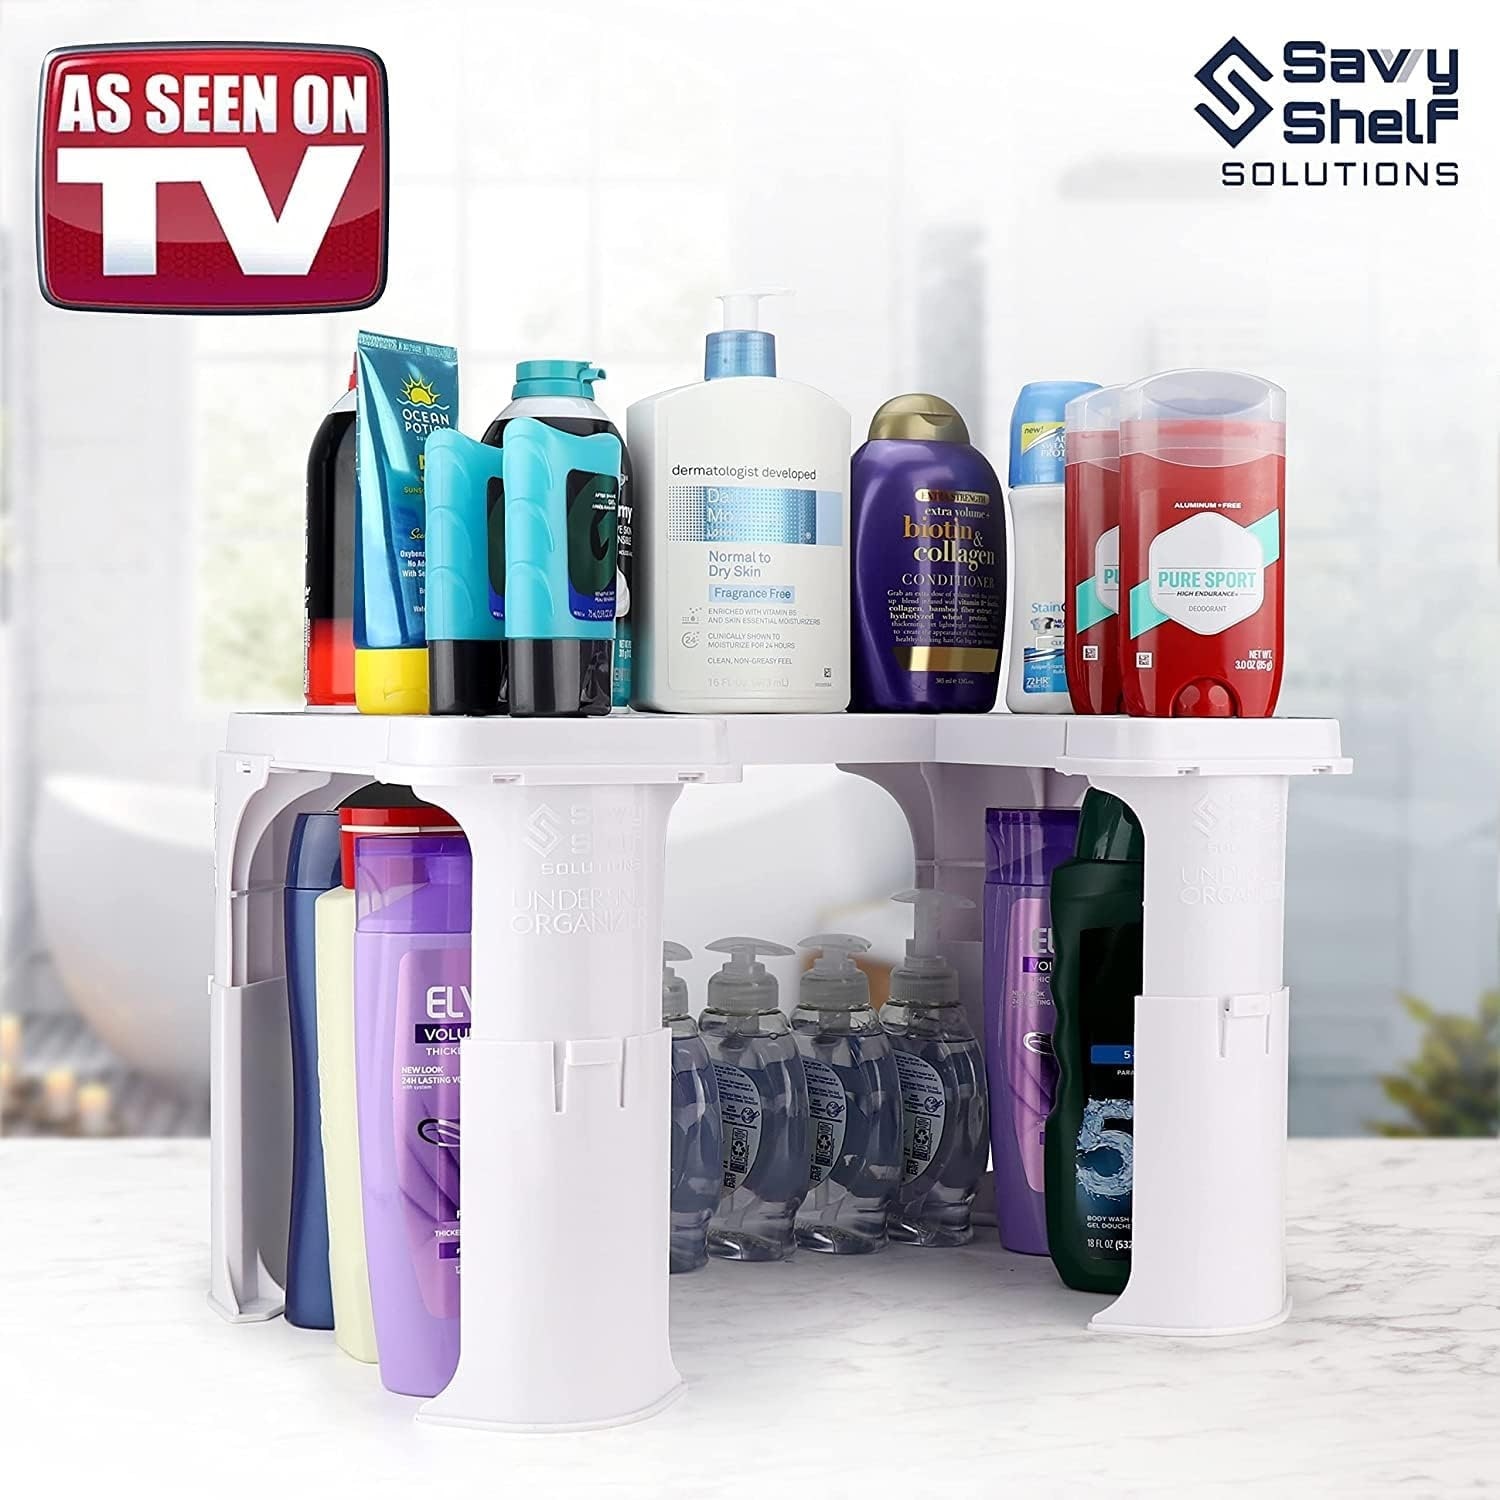 https://ak1.ostkcdn.com/images/products/is/images/direct/2a1f92d307b846e704c9c7446babd6c66b0de7e5/Expandable-Under-Sink-Organizer-and-Storage.jpg